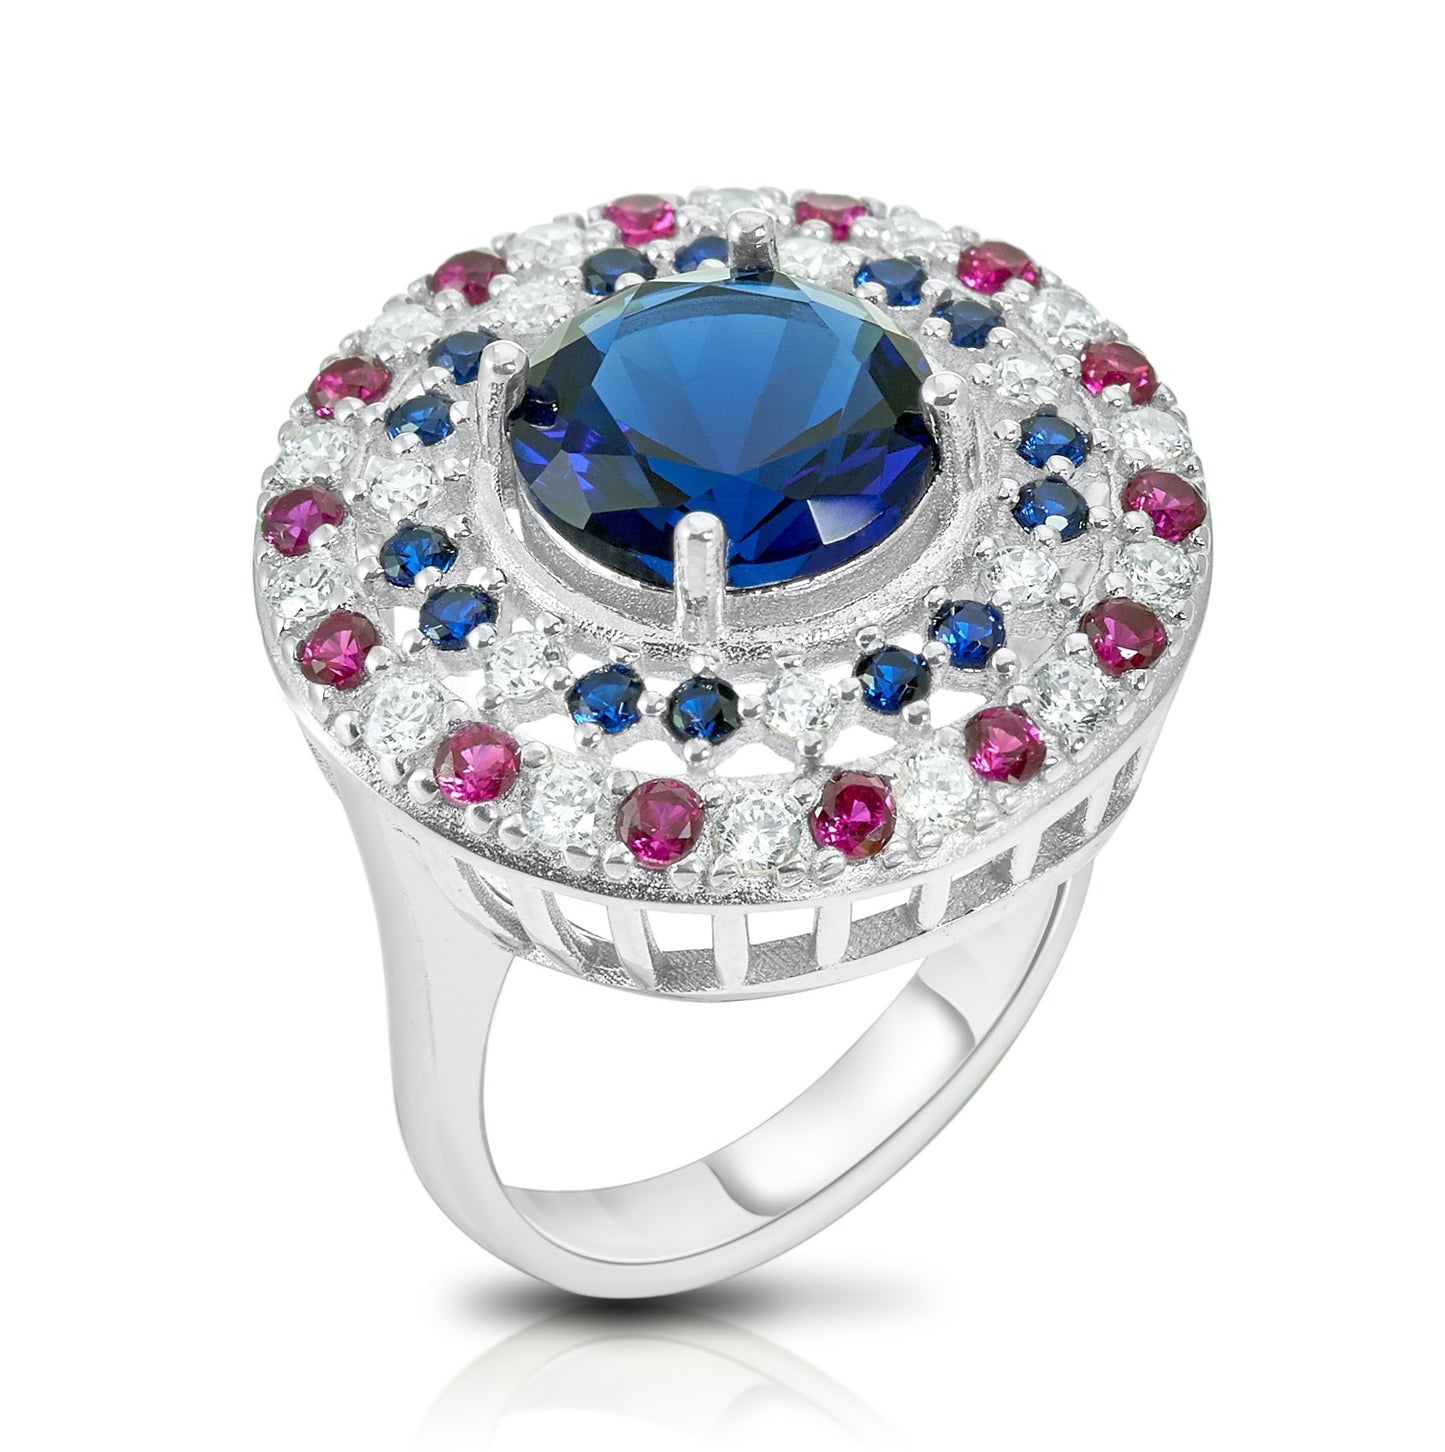 America Cocktail Ring